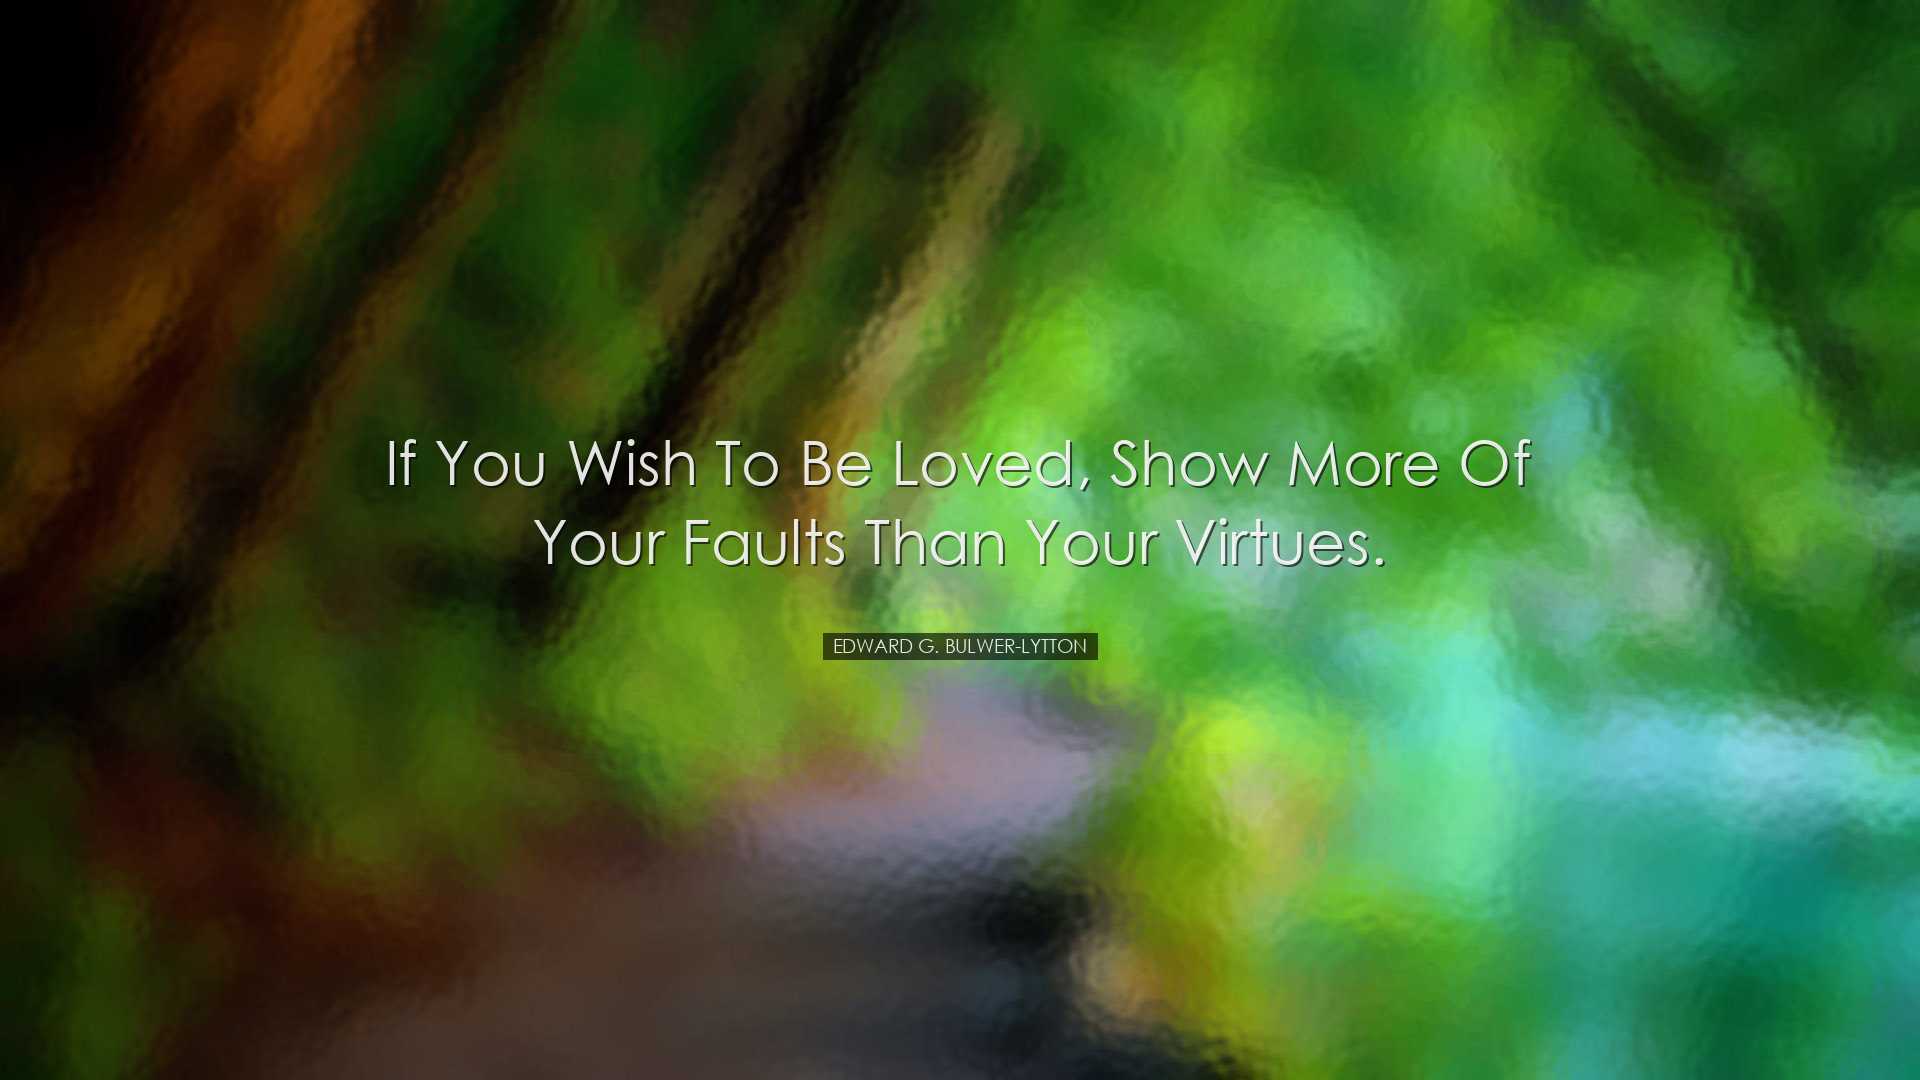 If you wish to be loved, show more of your faults than your virtue